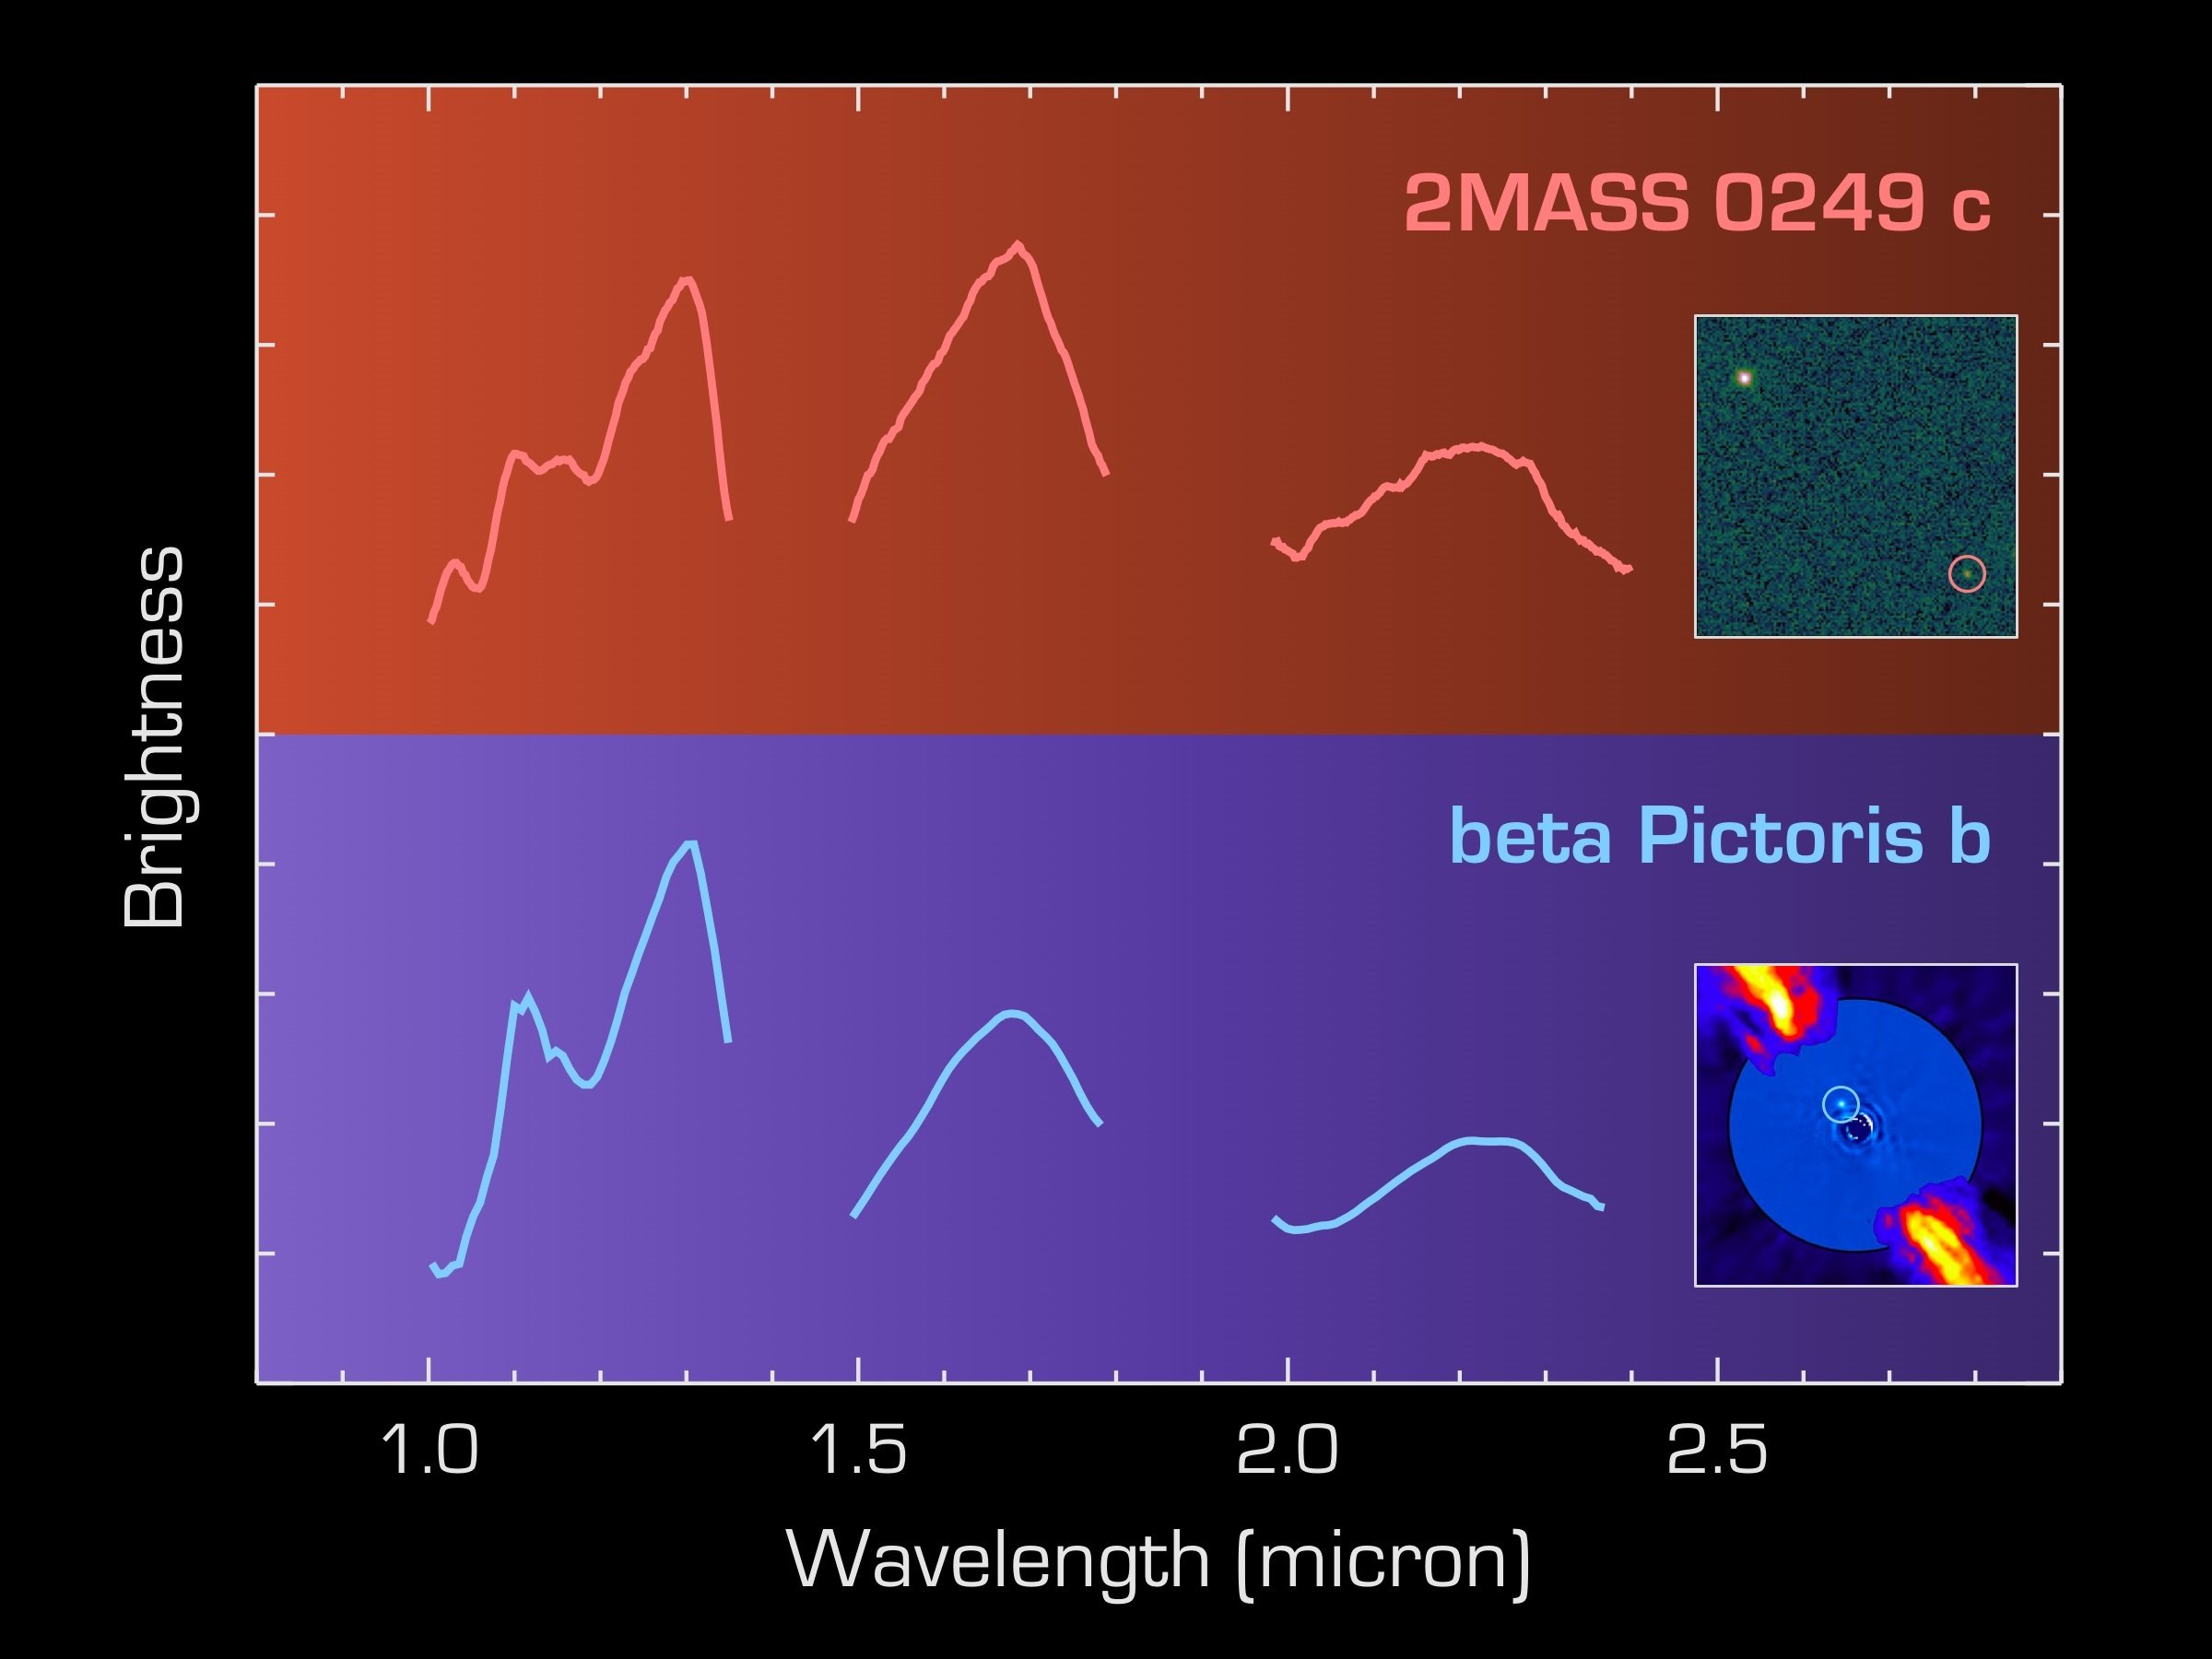 The infrared spectra of 2MASS 0249c and beta Pictoris b are similar, as expected for two objects of comparable mass that formed in the same stellar nursery. Unlike 2MASS 0249c, beta Pictoris b orbits much closer to its massive host star and is imbedded in a bright circumstellar disk. Credits: T. Dupuy, ESO/A.-M. Lagrange et al.